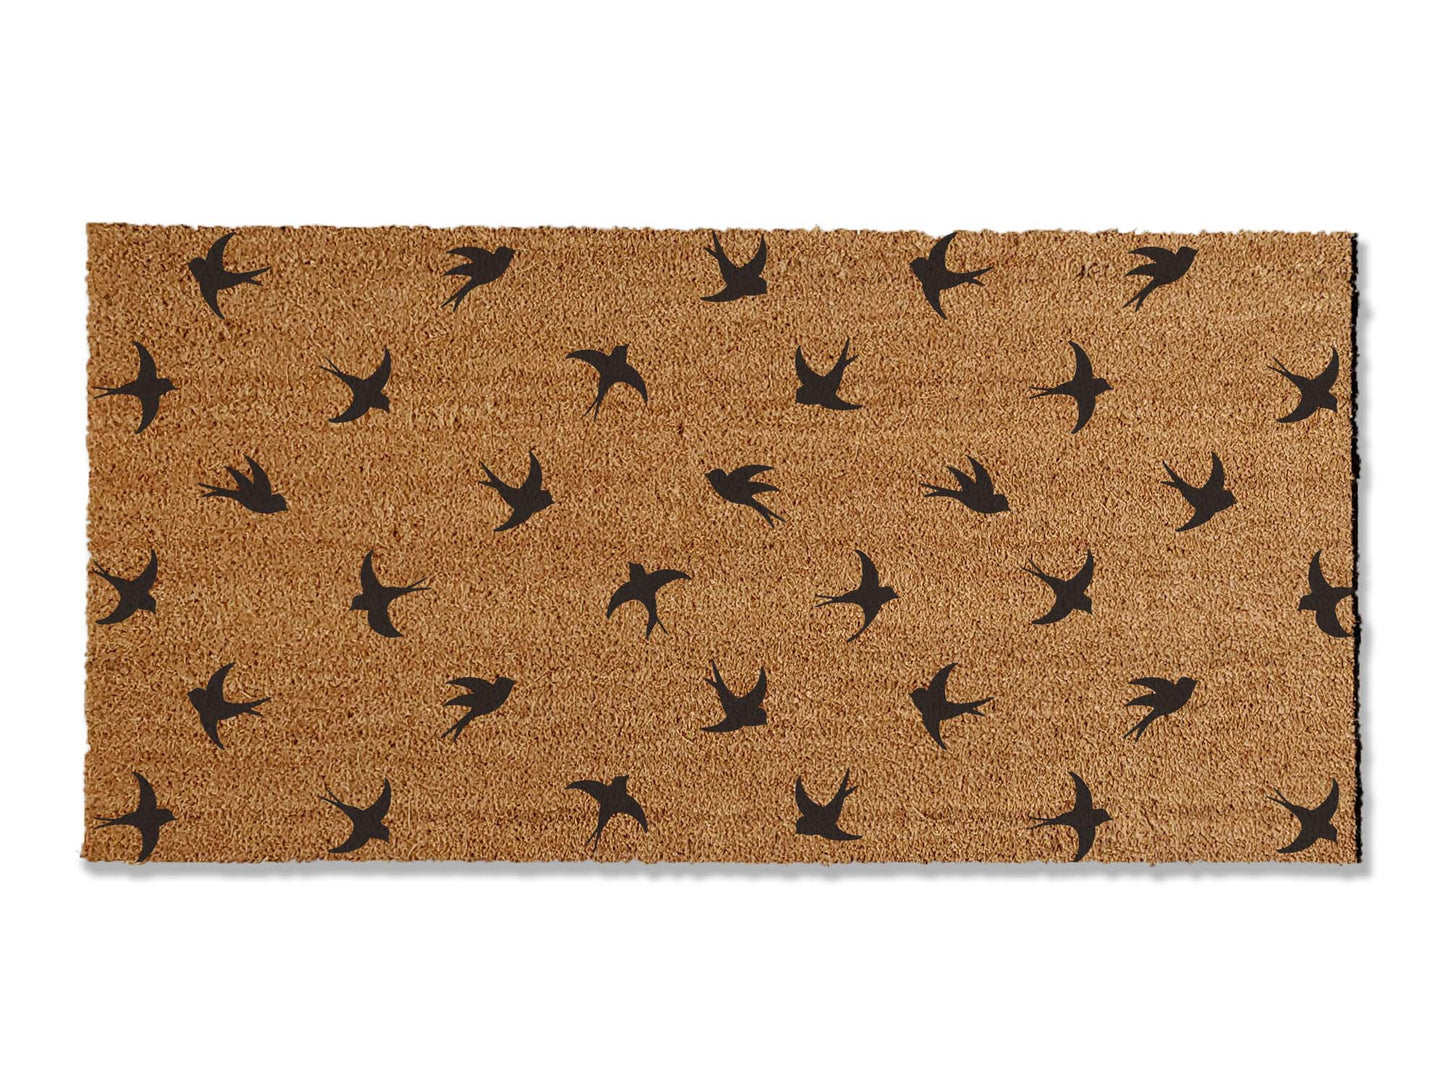 Enhance your entryway with a 1/2 inch thick coir doormat adorned with a beautiful bird pattern. This functional and stylish mat effectively traps dirt, adding a touch of elegance to your home's entrance.